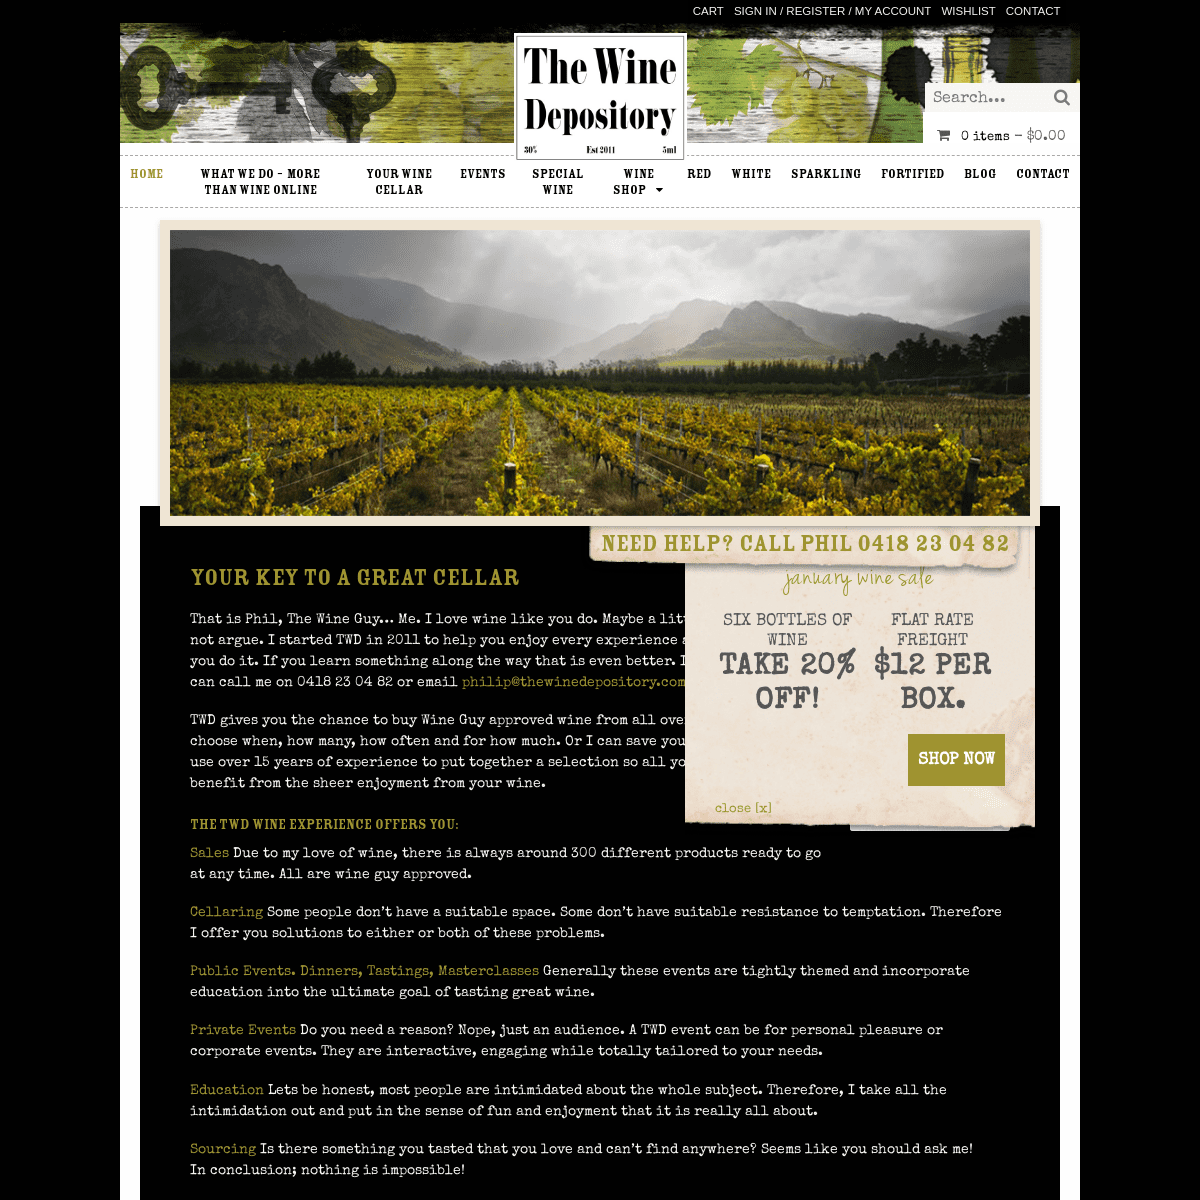 A complete backup of thewinedepository.com.au